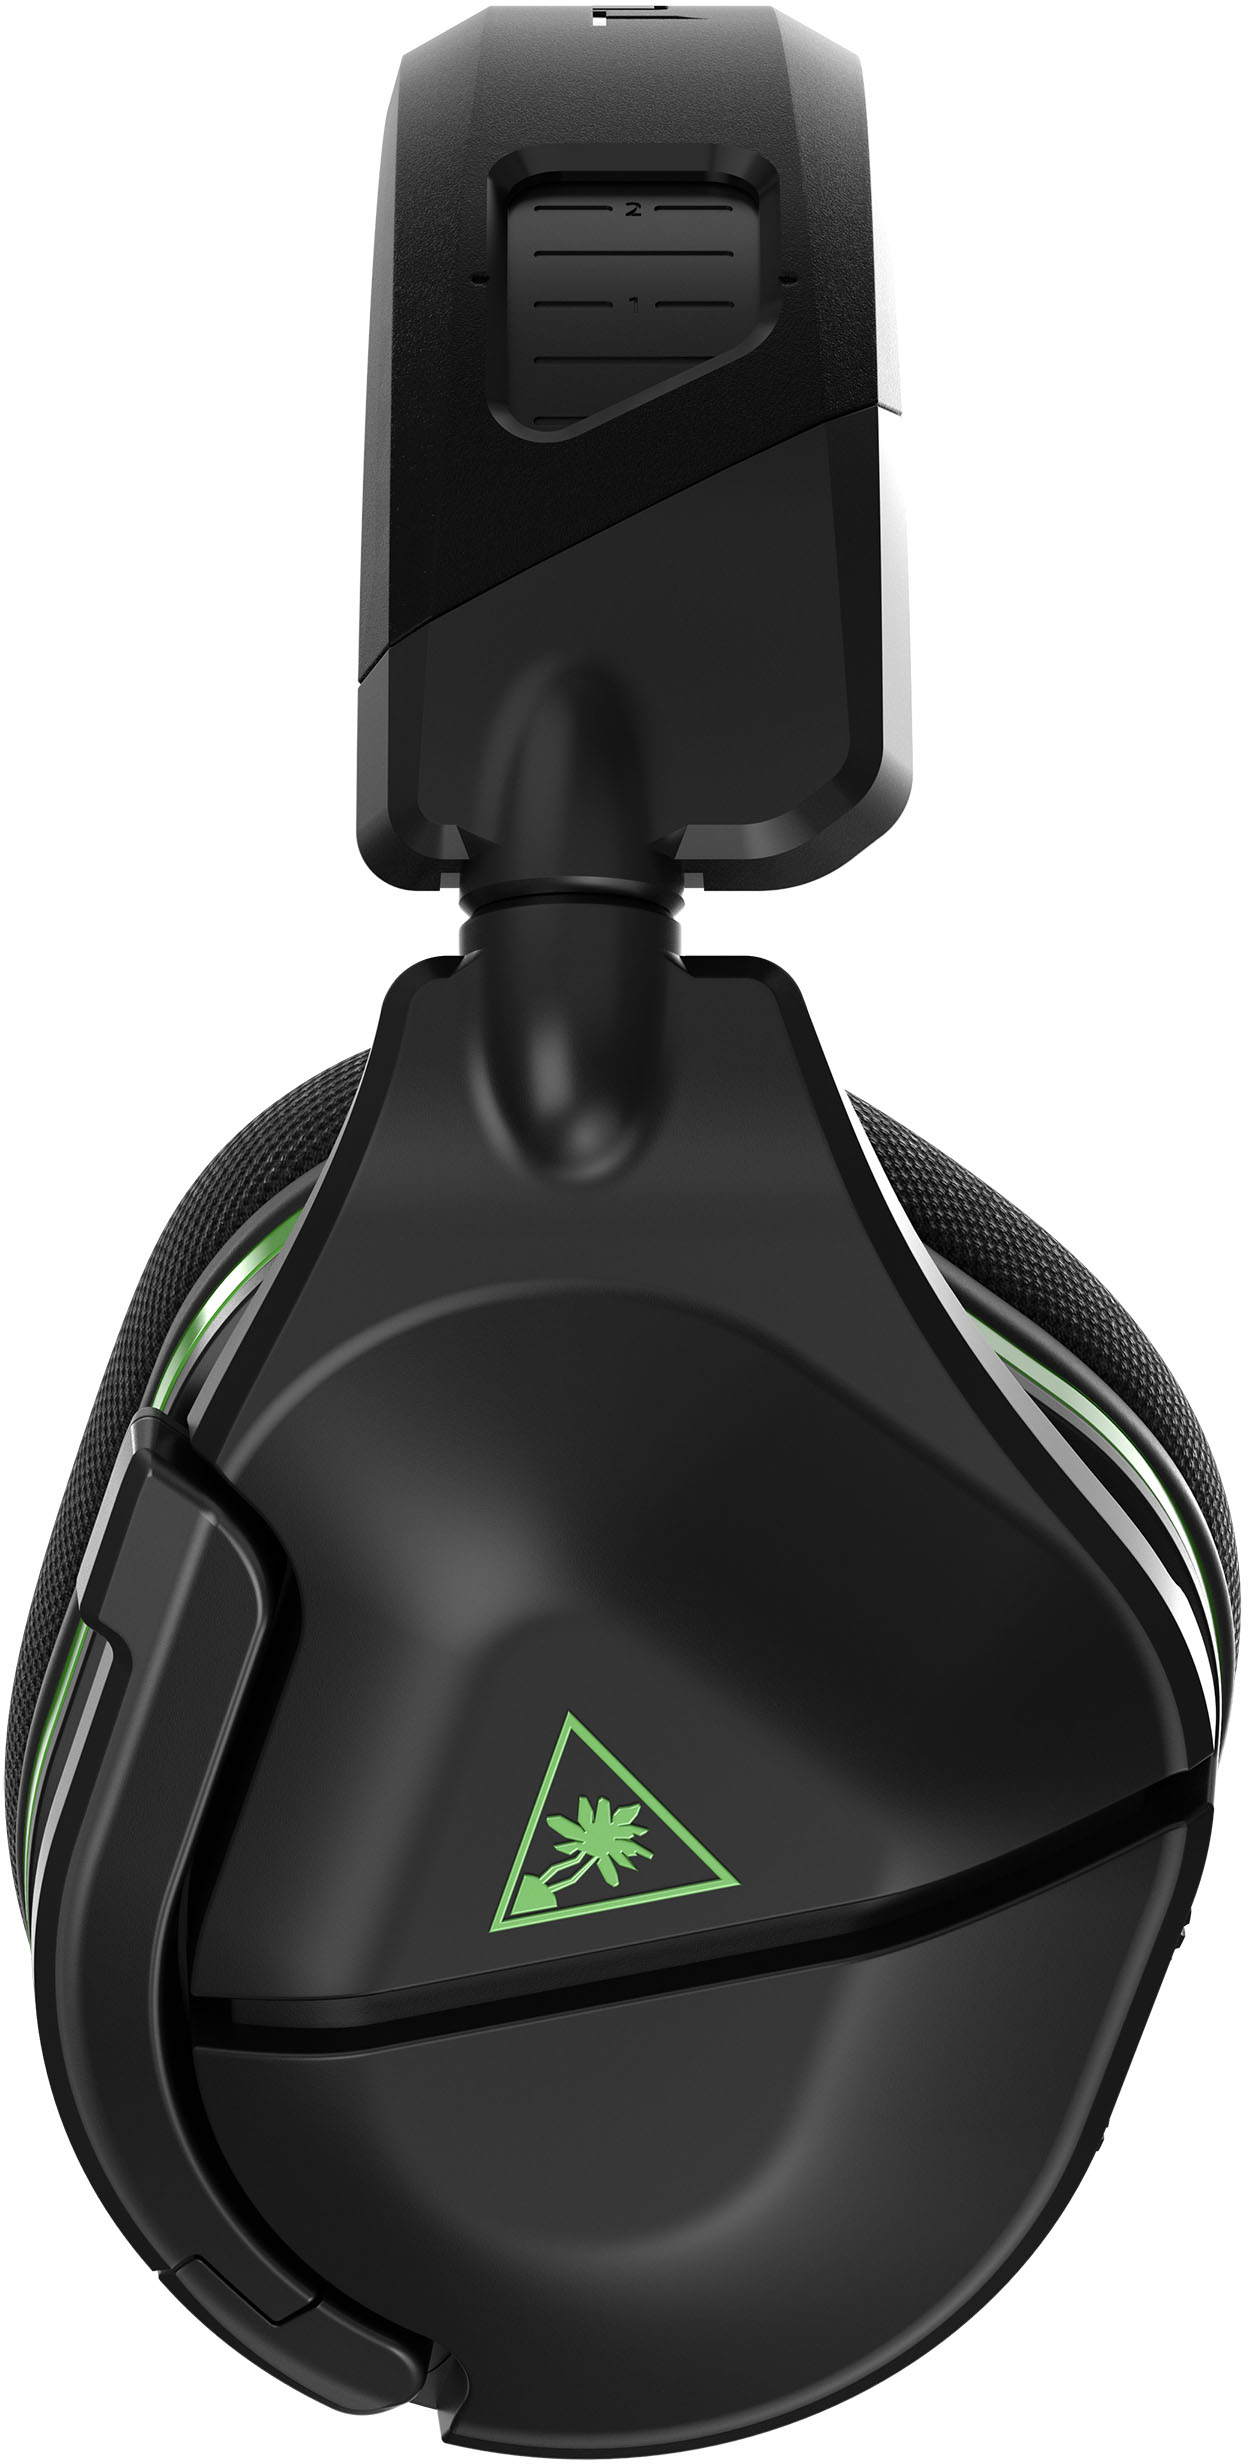 Turtle Beach Stealth 600 Gen 2 USB Wireless Gaming Headset for Xbox Series  X/S and Xbox One | GameStop